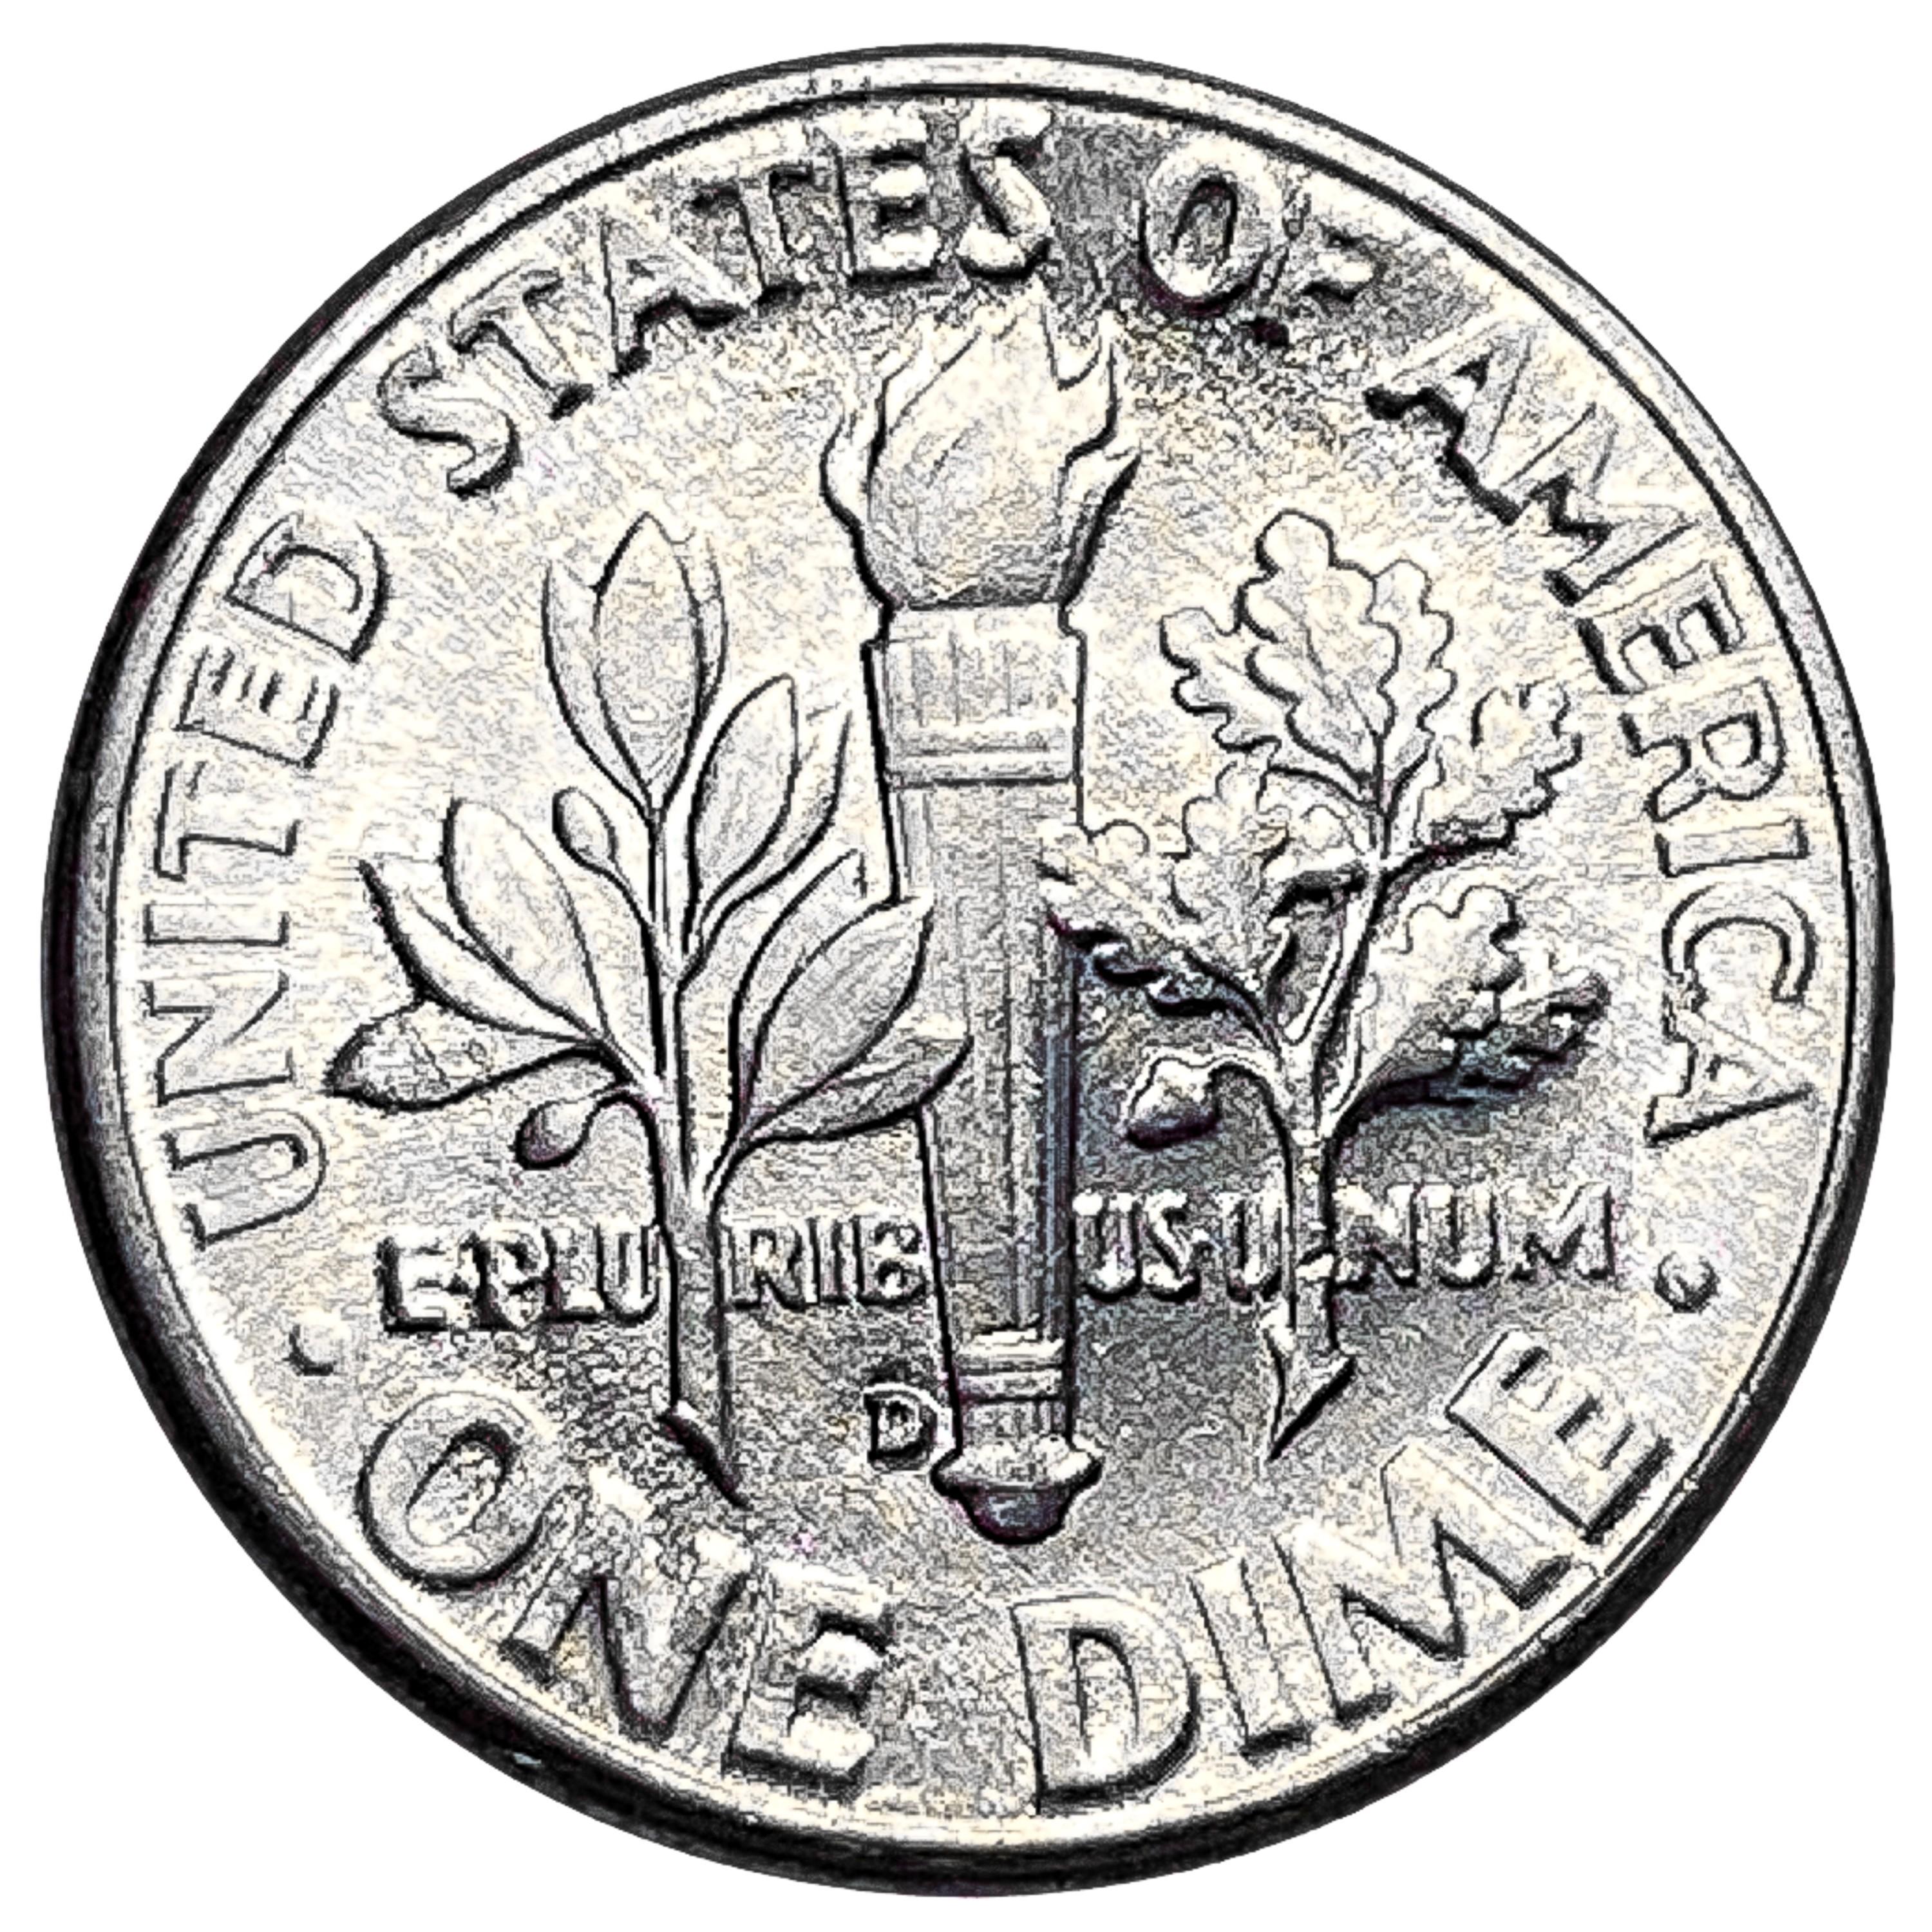 1948-D Unc. Roll of Rooesvelt Dimes [50 Coins]